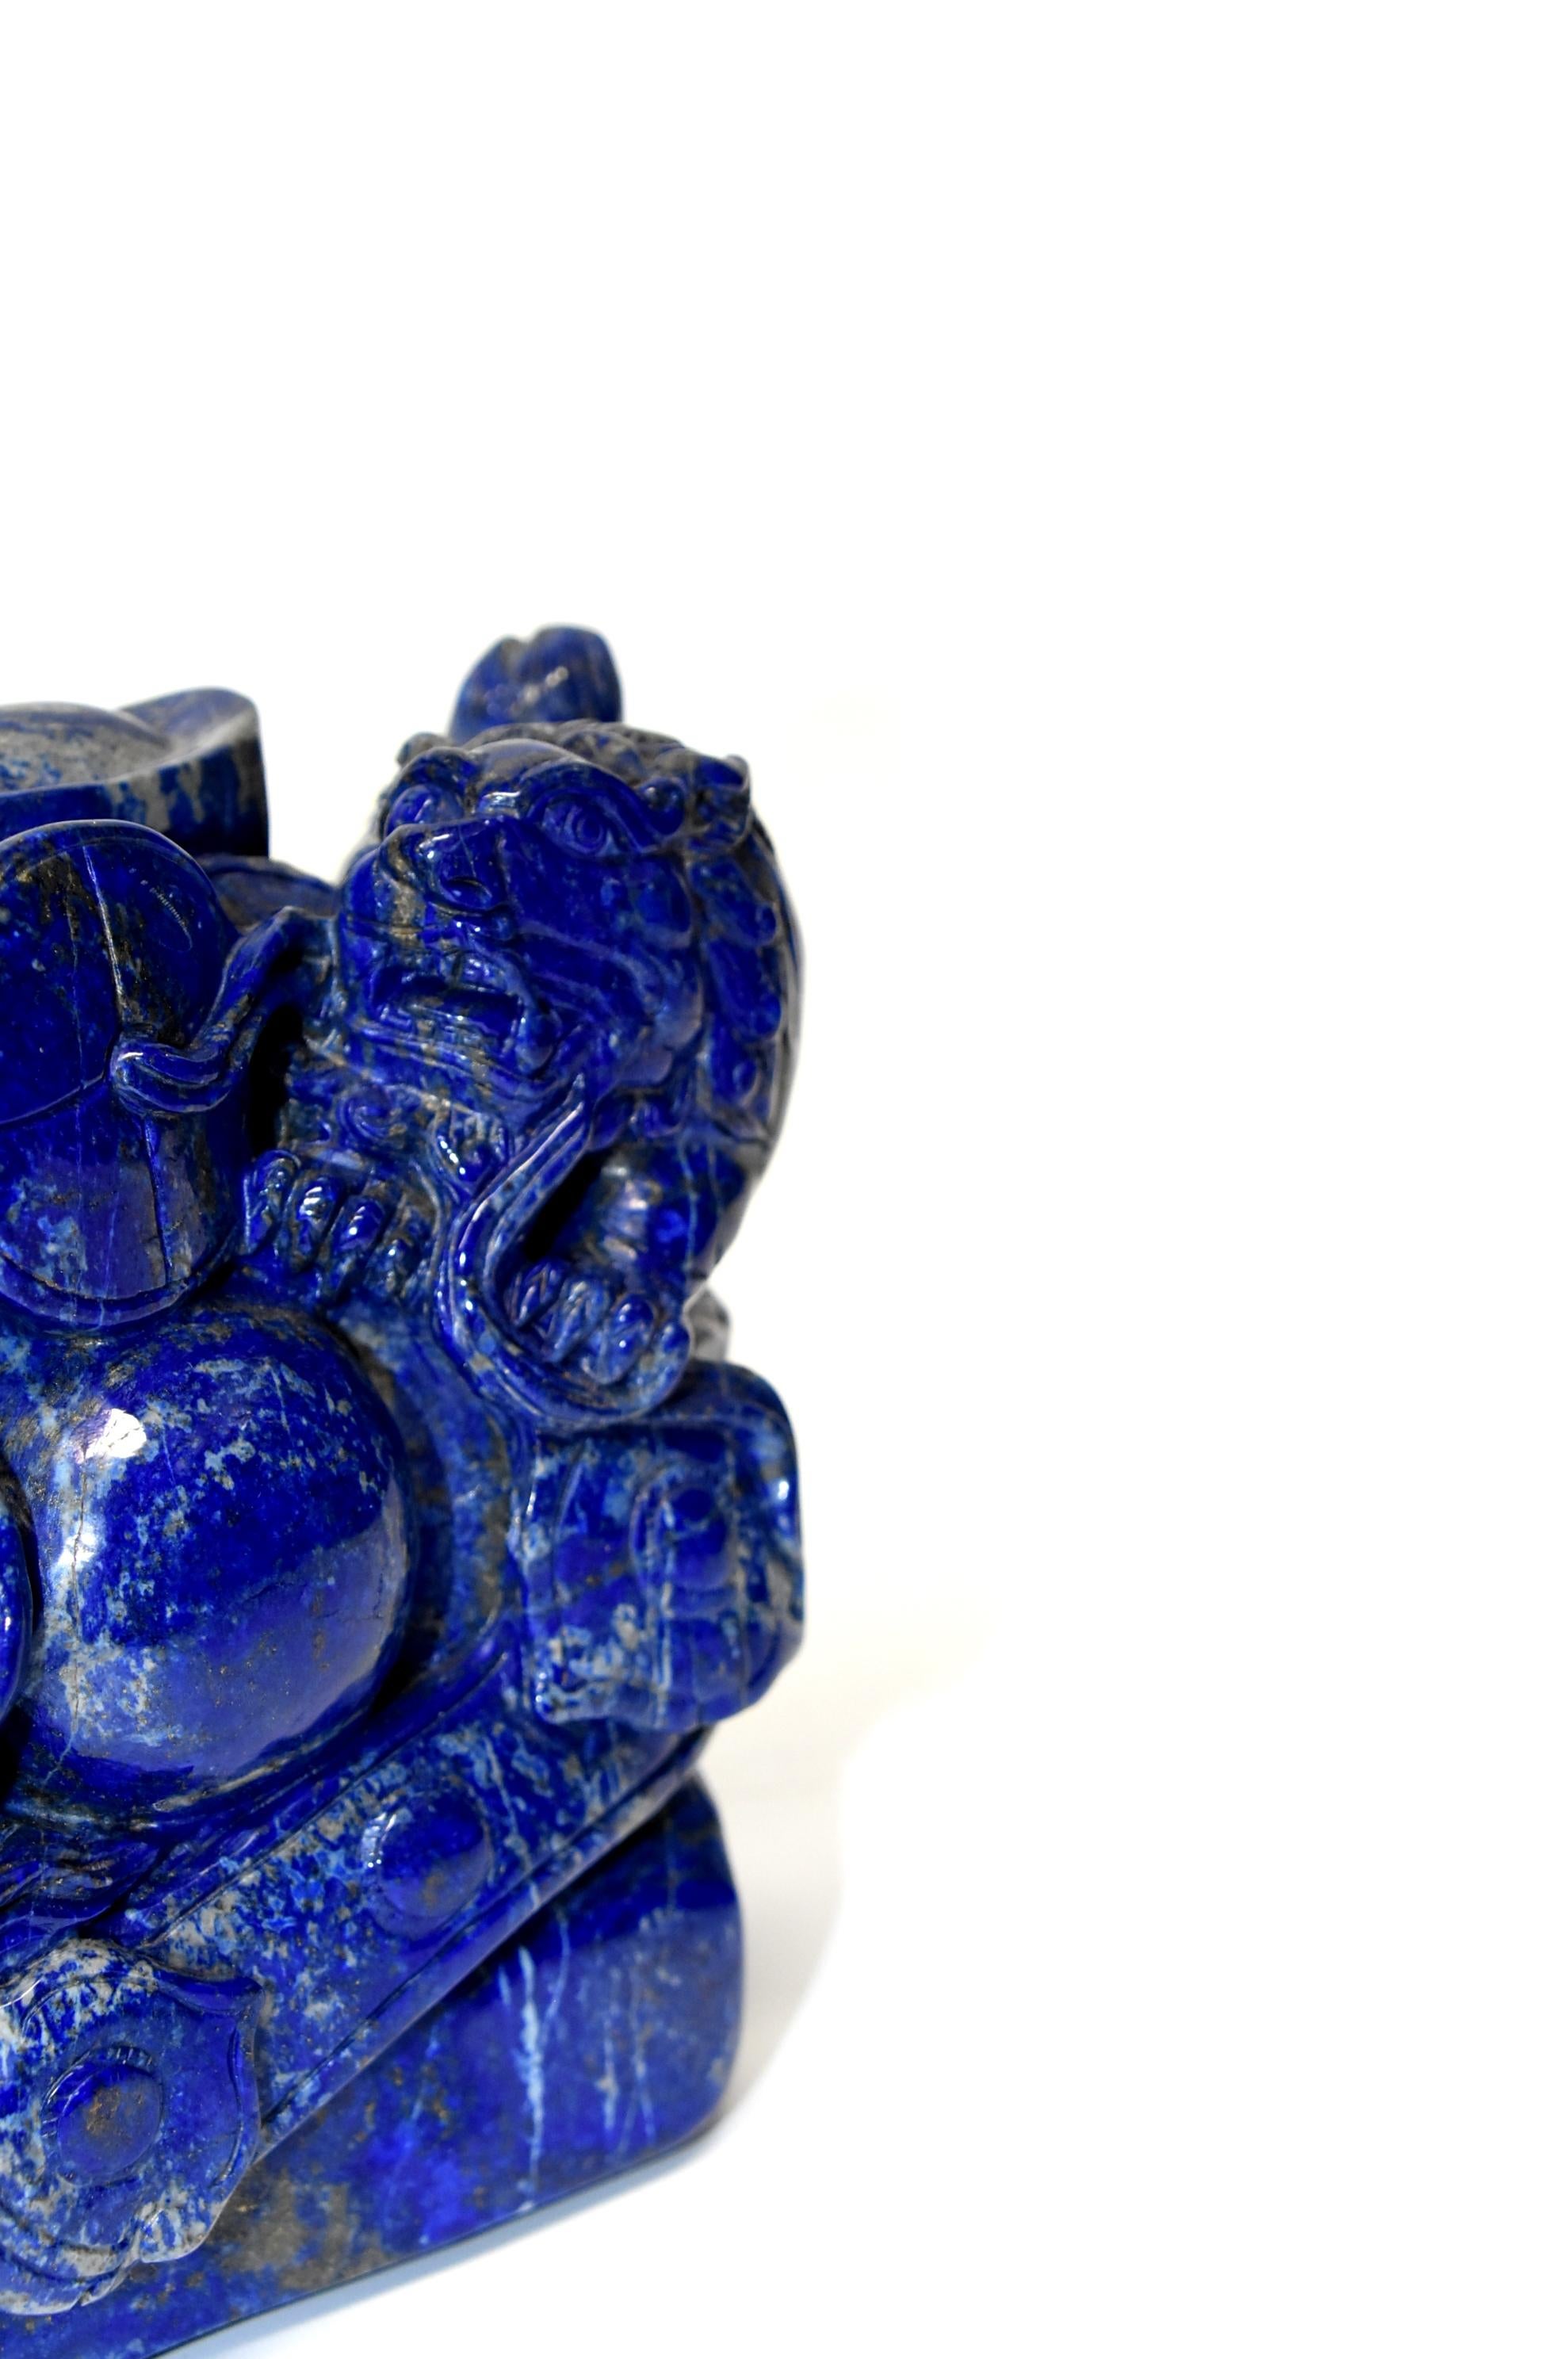 Natural Lapis Lazuli 8 lb Block with Carved Lions 3